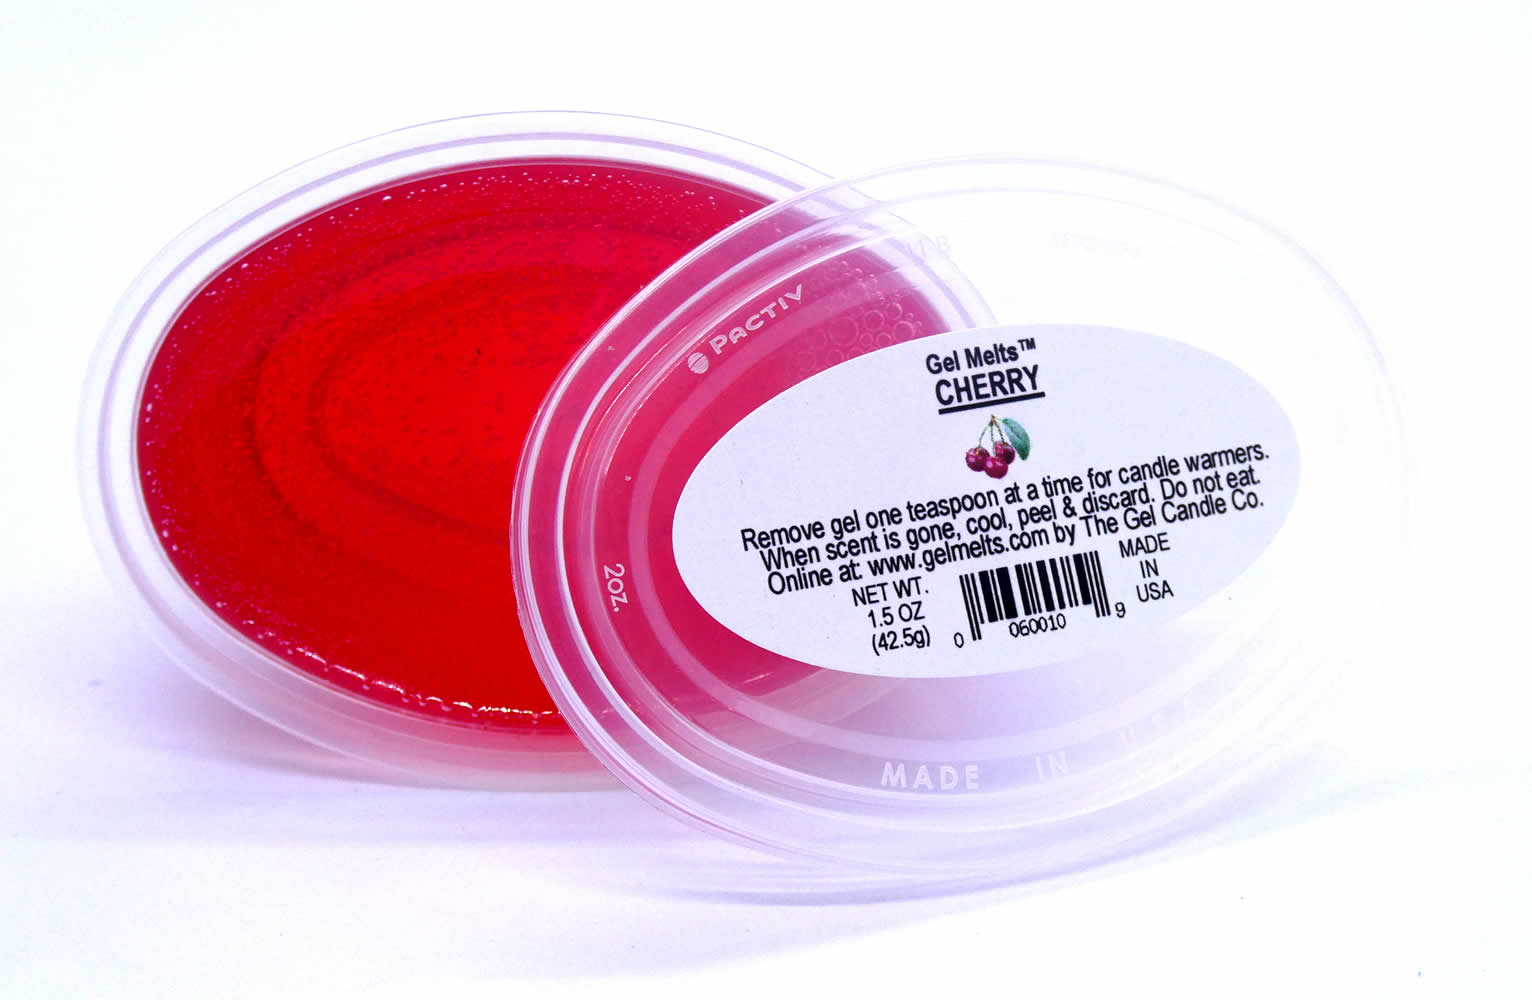 Cherry scented Gel Melts™ Gel Wax for warmers - 3 pack - Click Image to Close